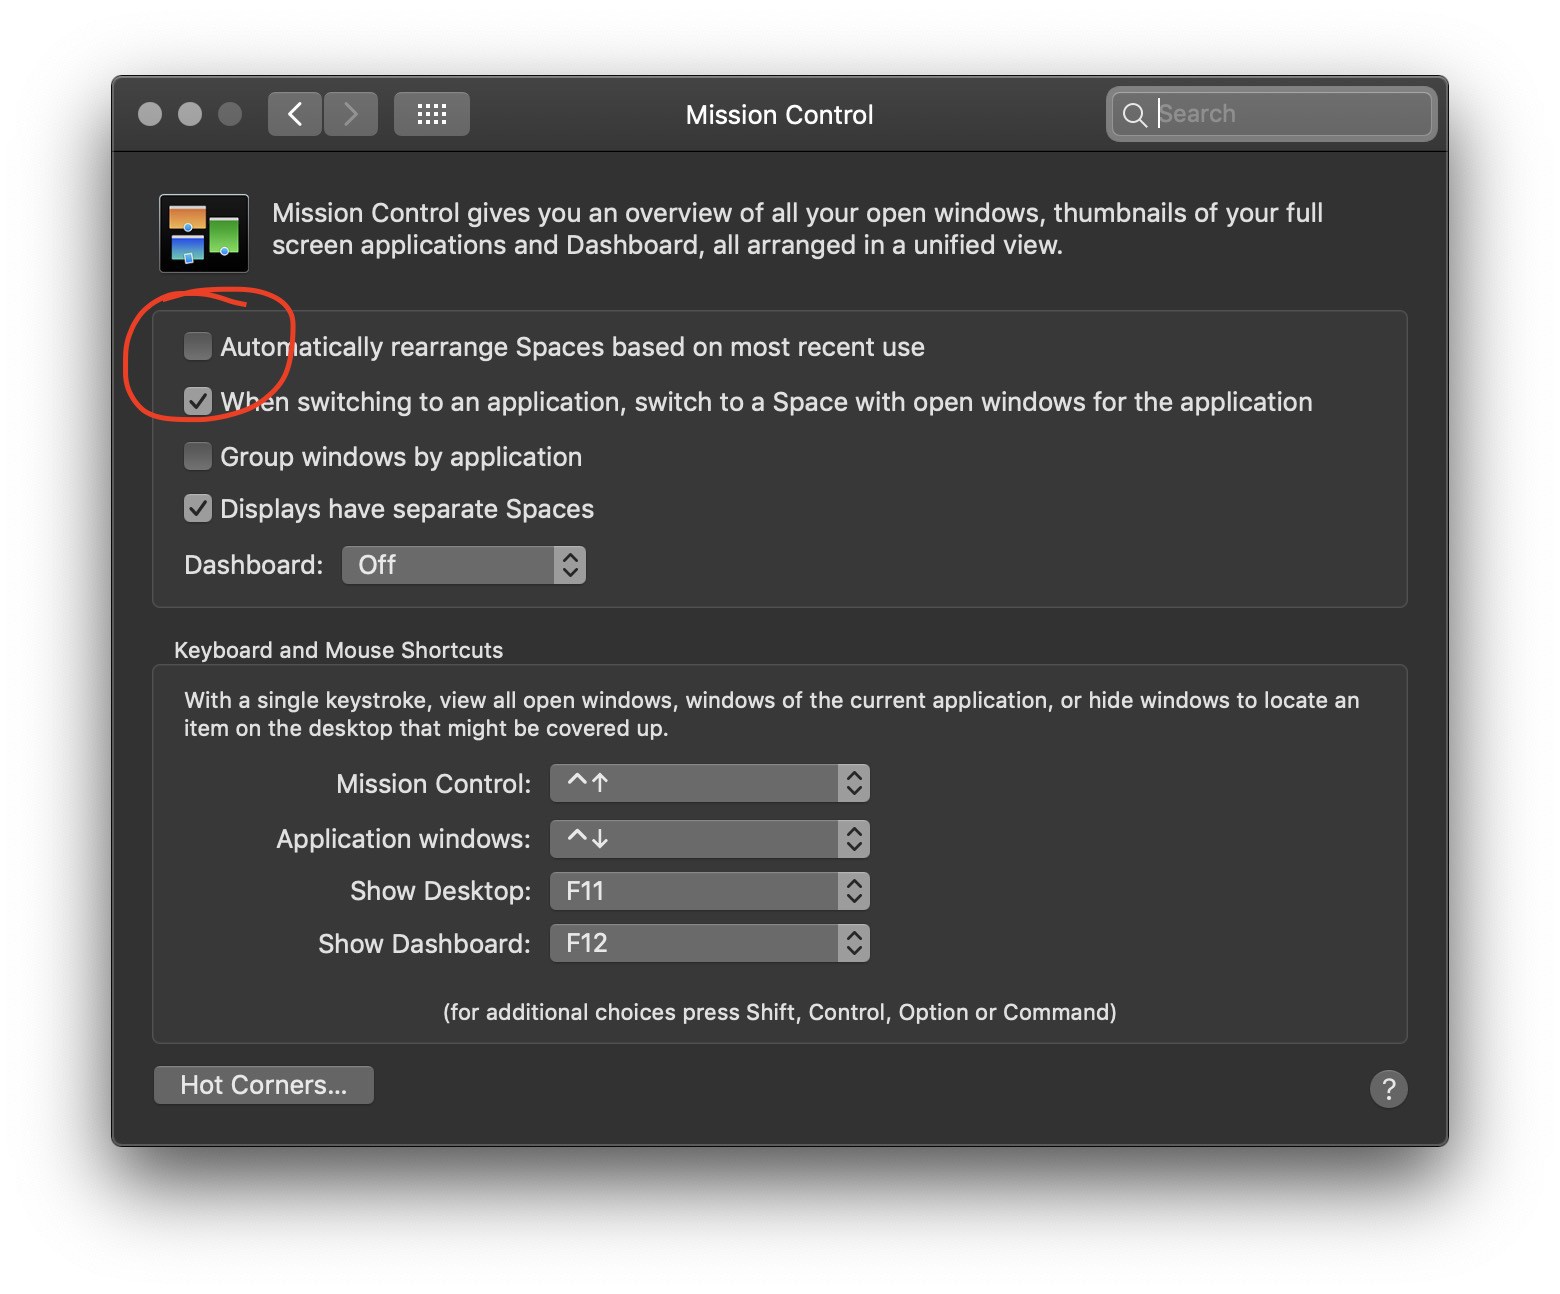 A screenshot of the Mission Control setting panel in System Preferences. The first tick box is “Automatically rearrange Spaces based on most recent use”